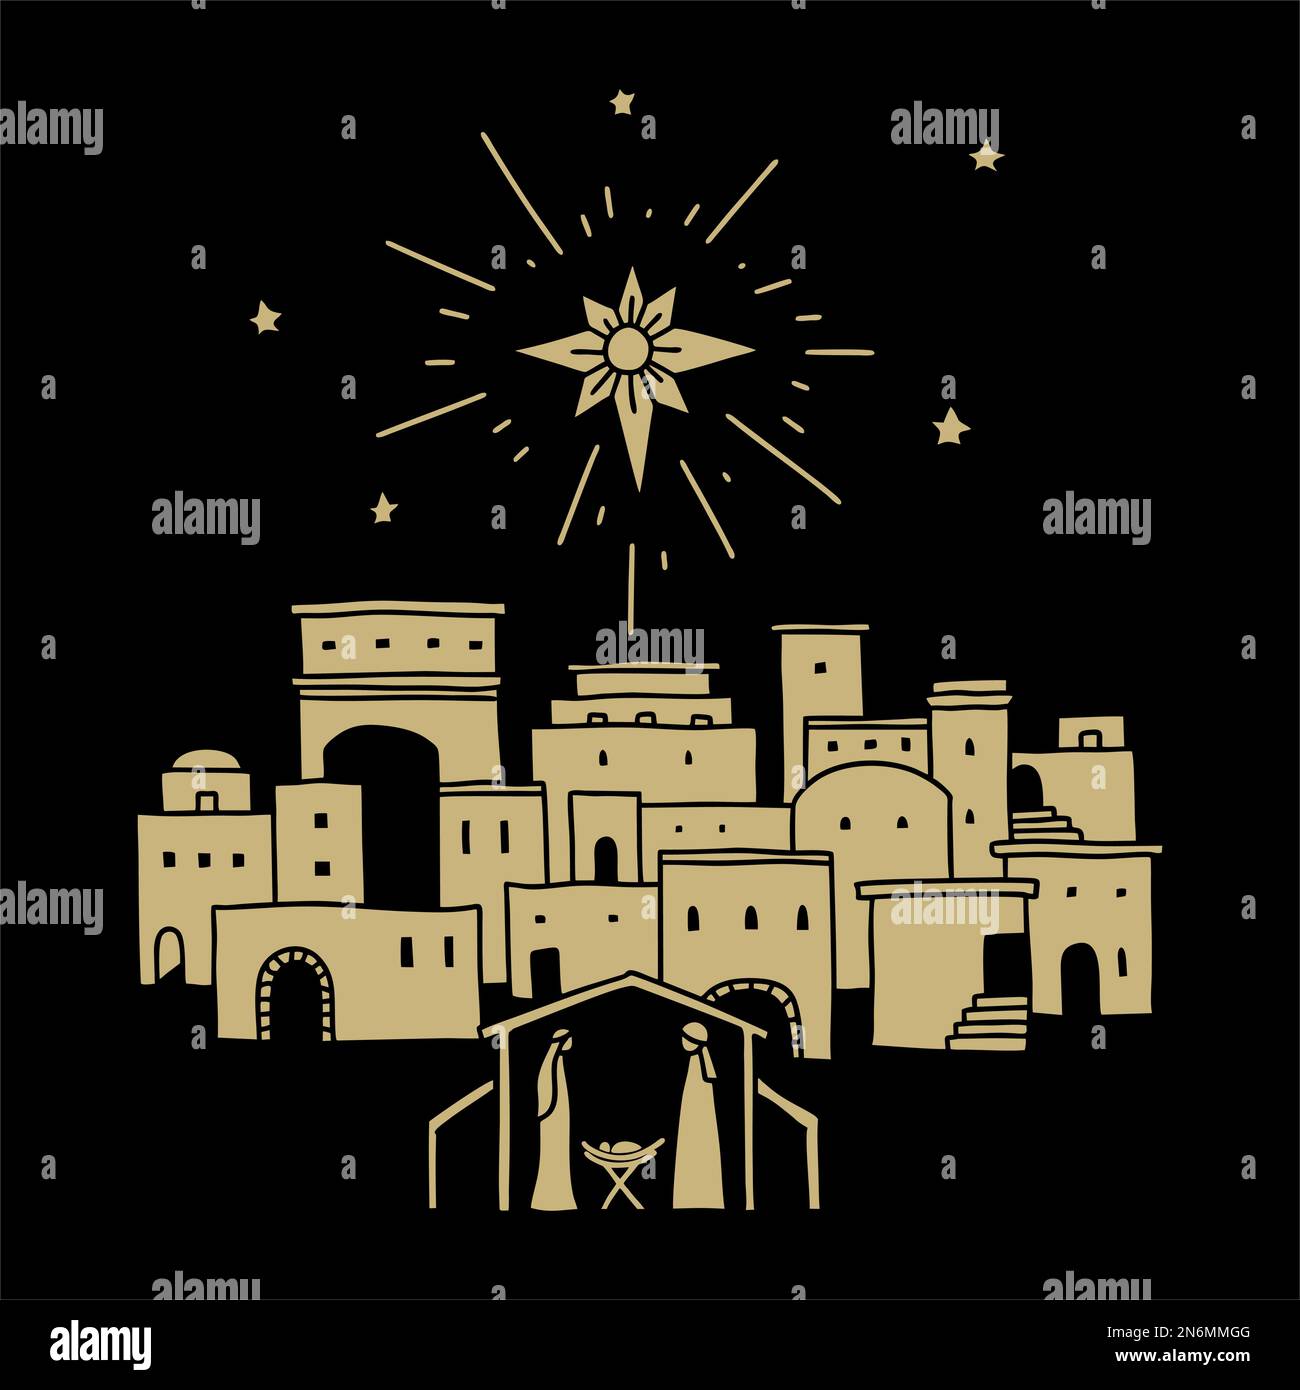 Vector doodle illustration. Star over Bethlehem. Mary, Joseph and baby Jesus in the stable. Stock Vector